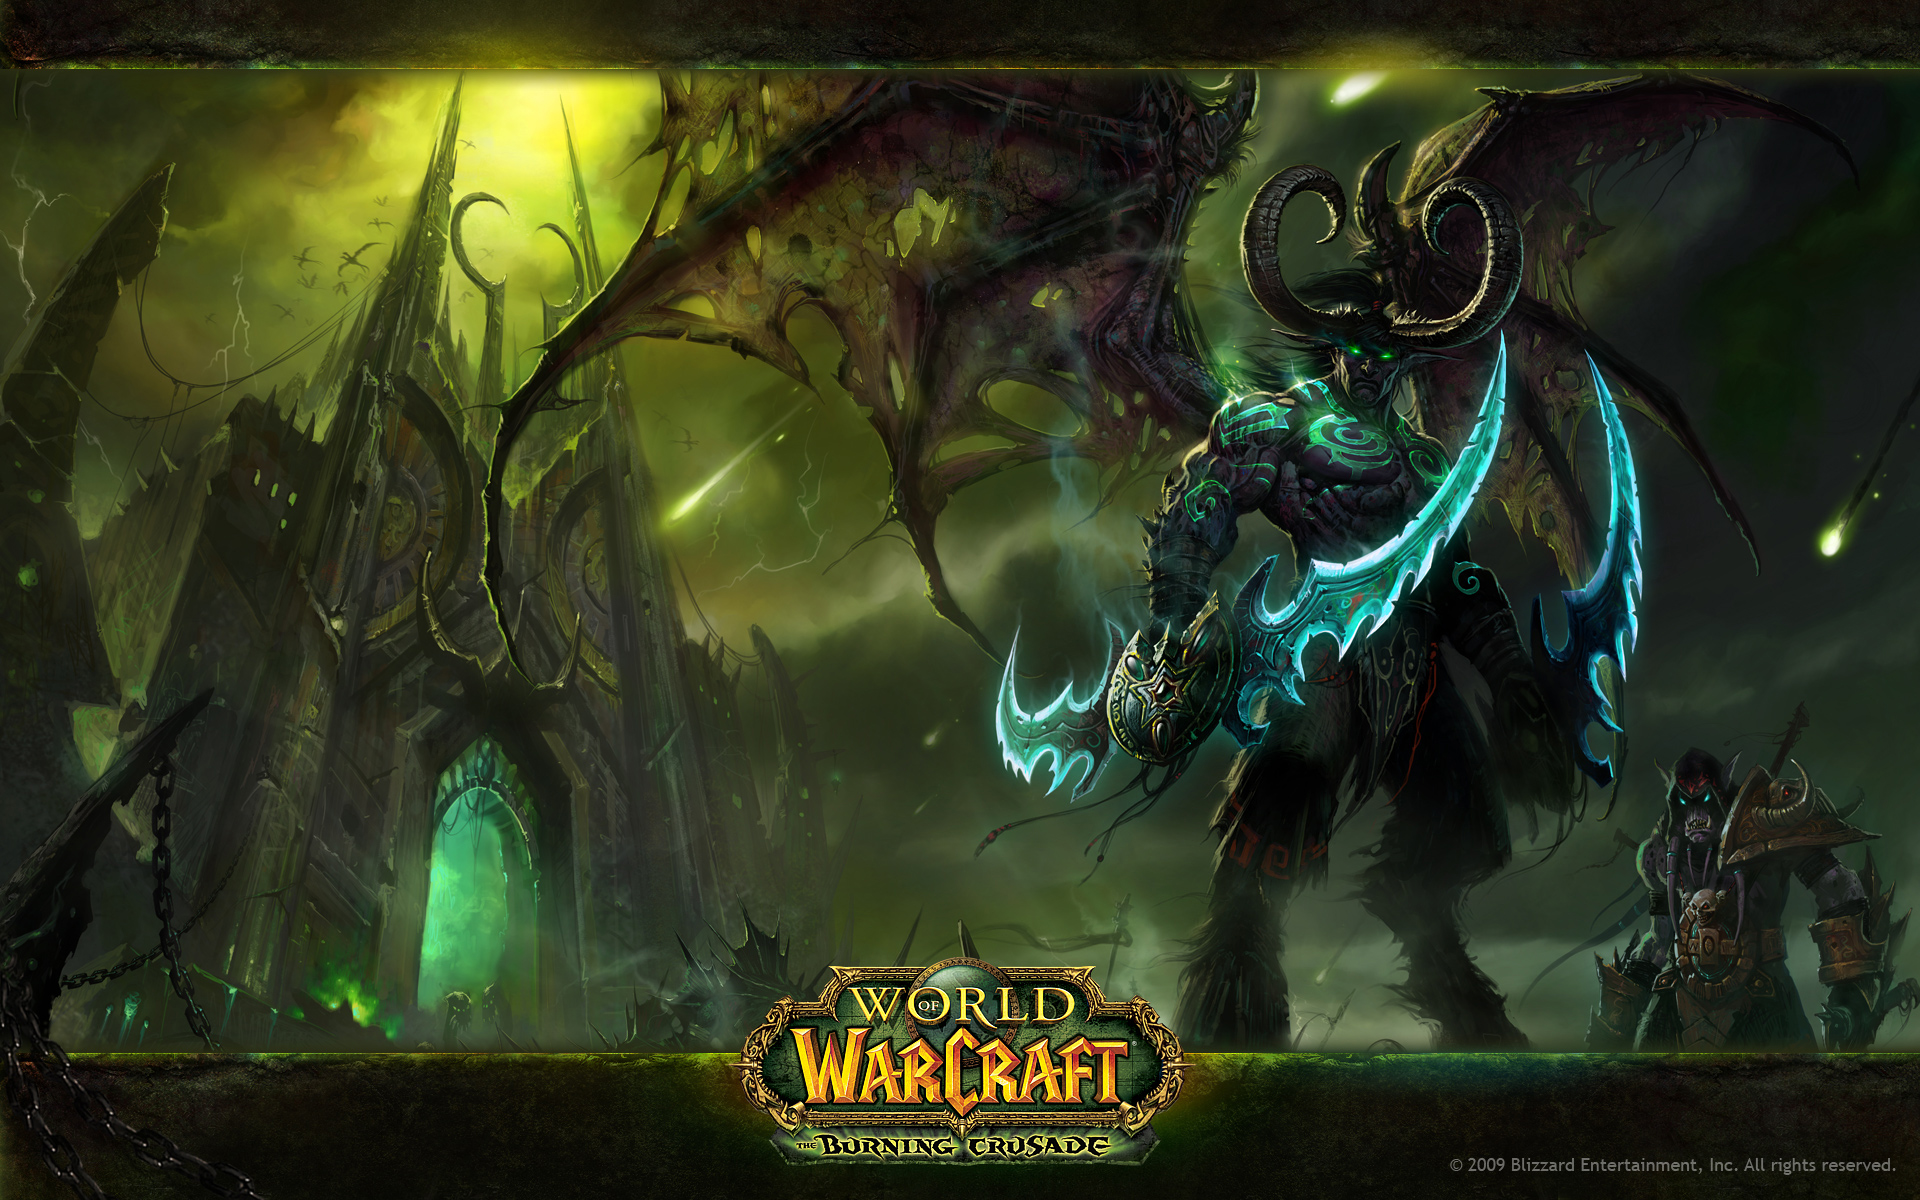 world of warcraft pc Wallpapers